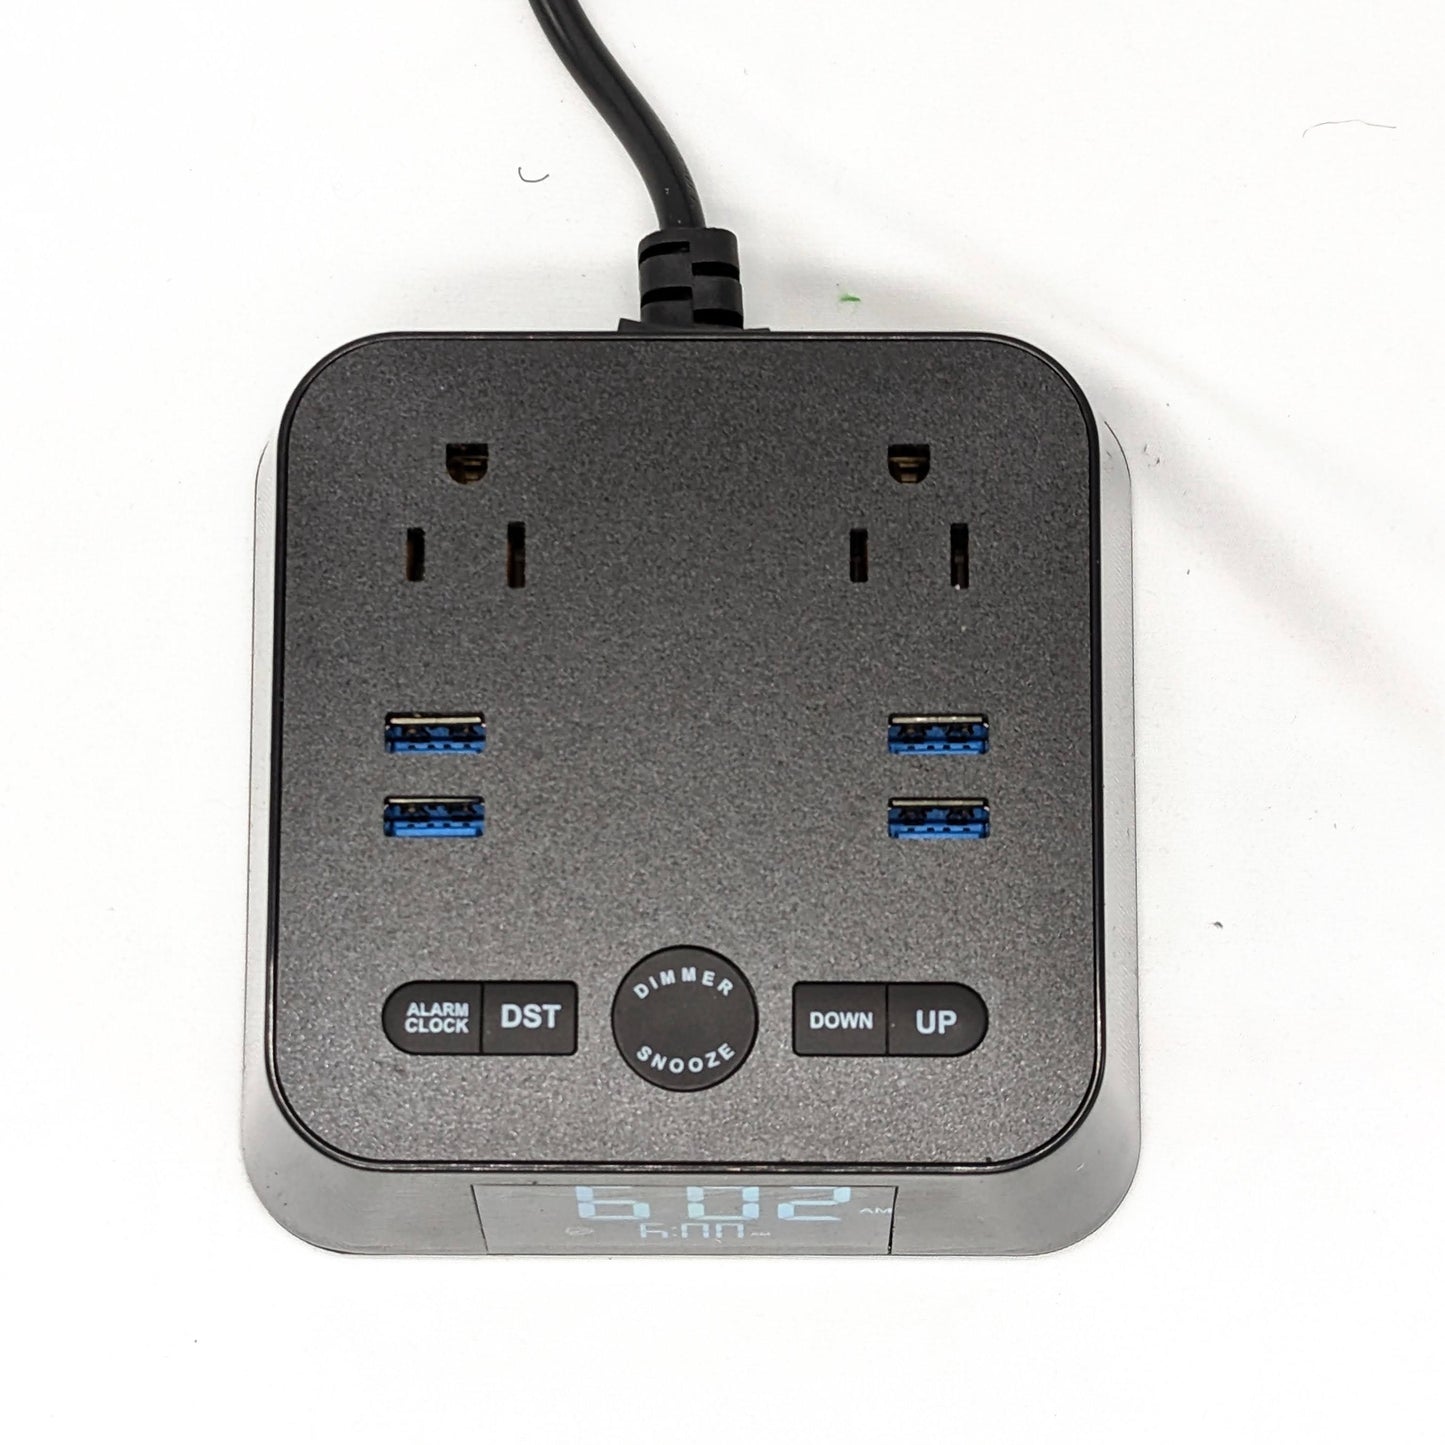 New! Power Hub Ultra with Alarm Clock - Charge up to 6 devices using 1 wall outlet - Great Useful Stuff - No Cover